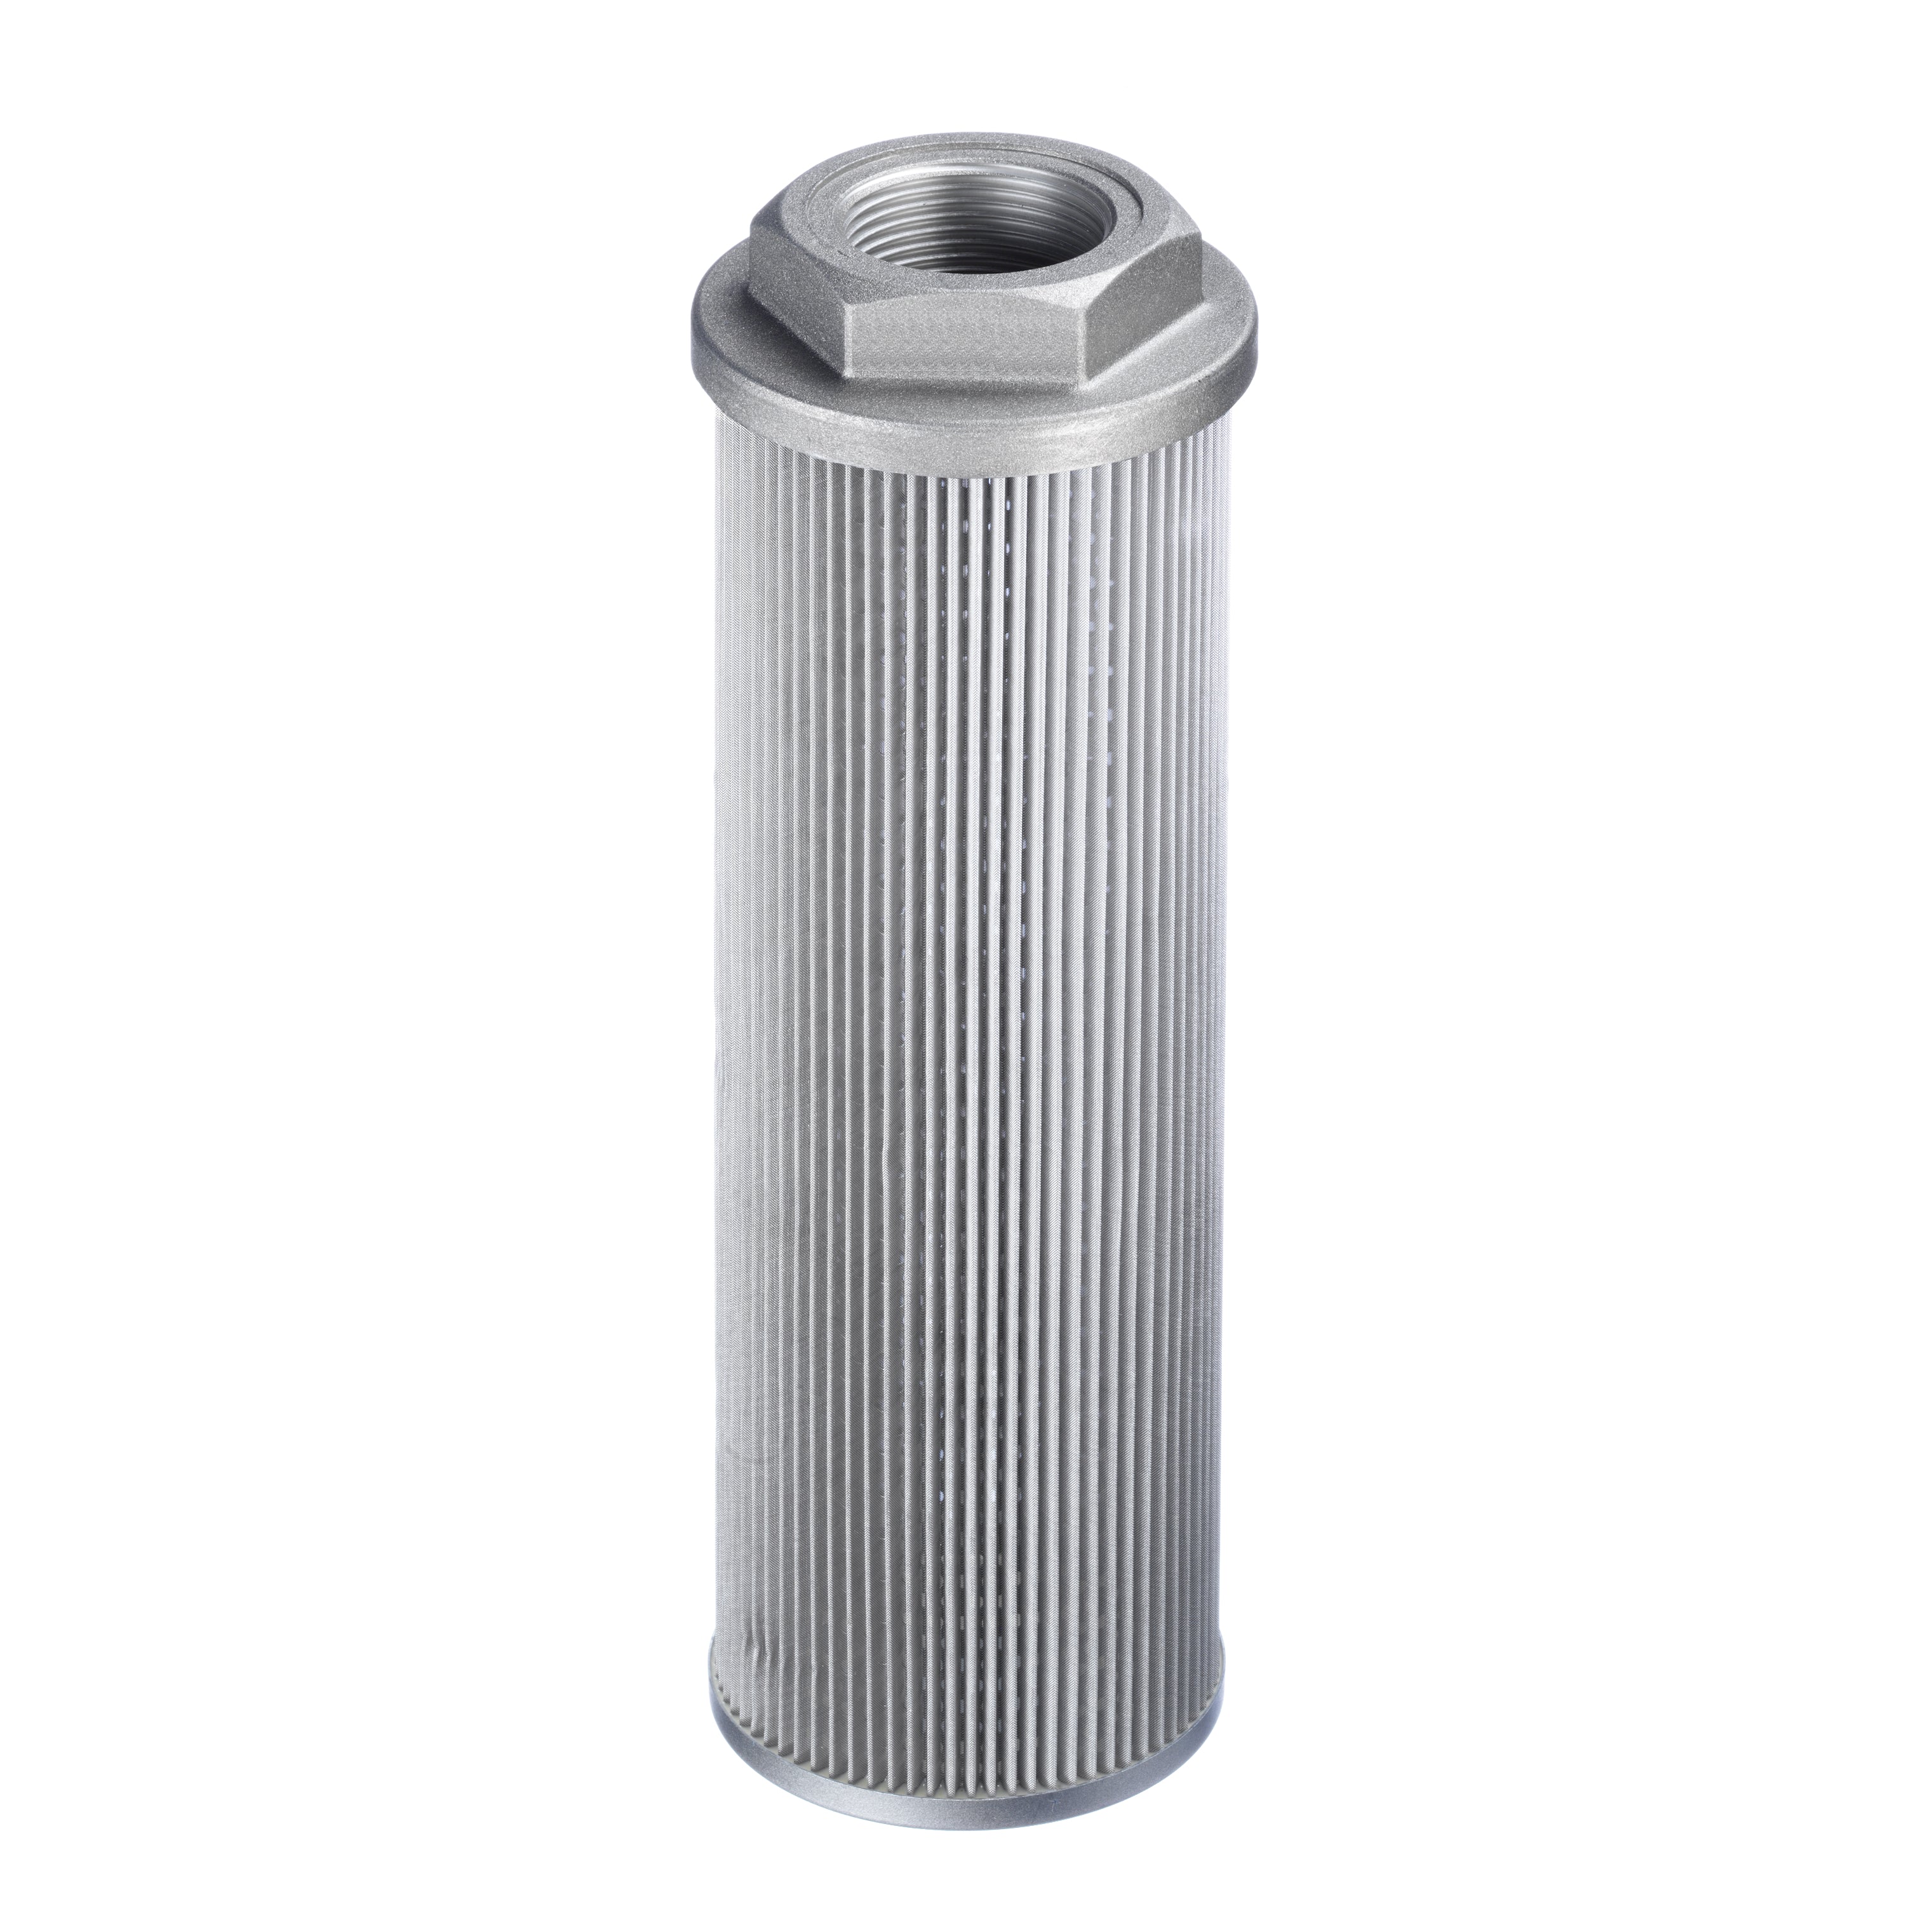 SUS-088-N24-226-125-A-B0.2 : Stauff Suction Strainer, Aluminum End Cap, 1.5" NPT, 36.4GPM, 125 Micron, 3psi Bypass